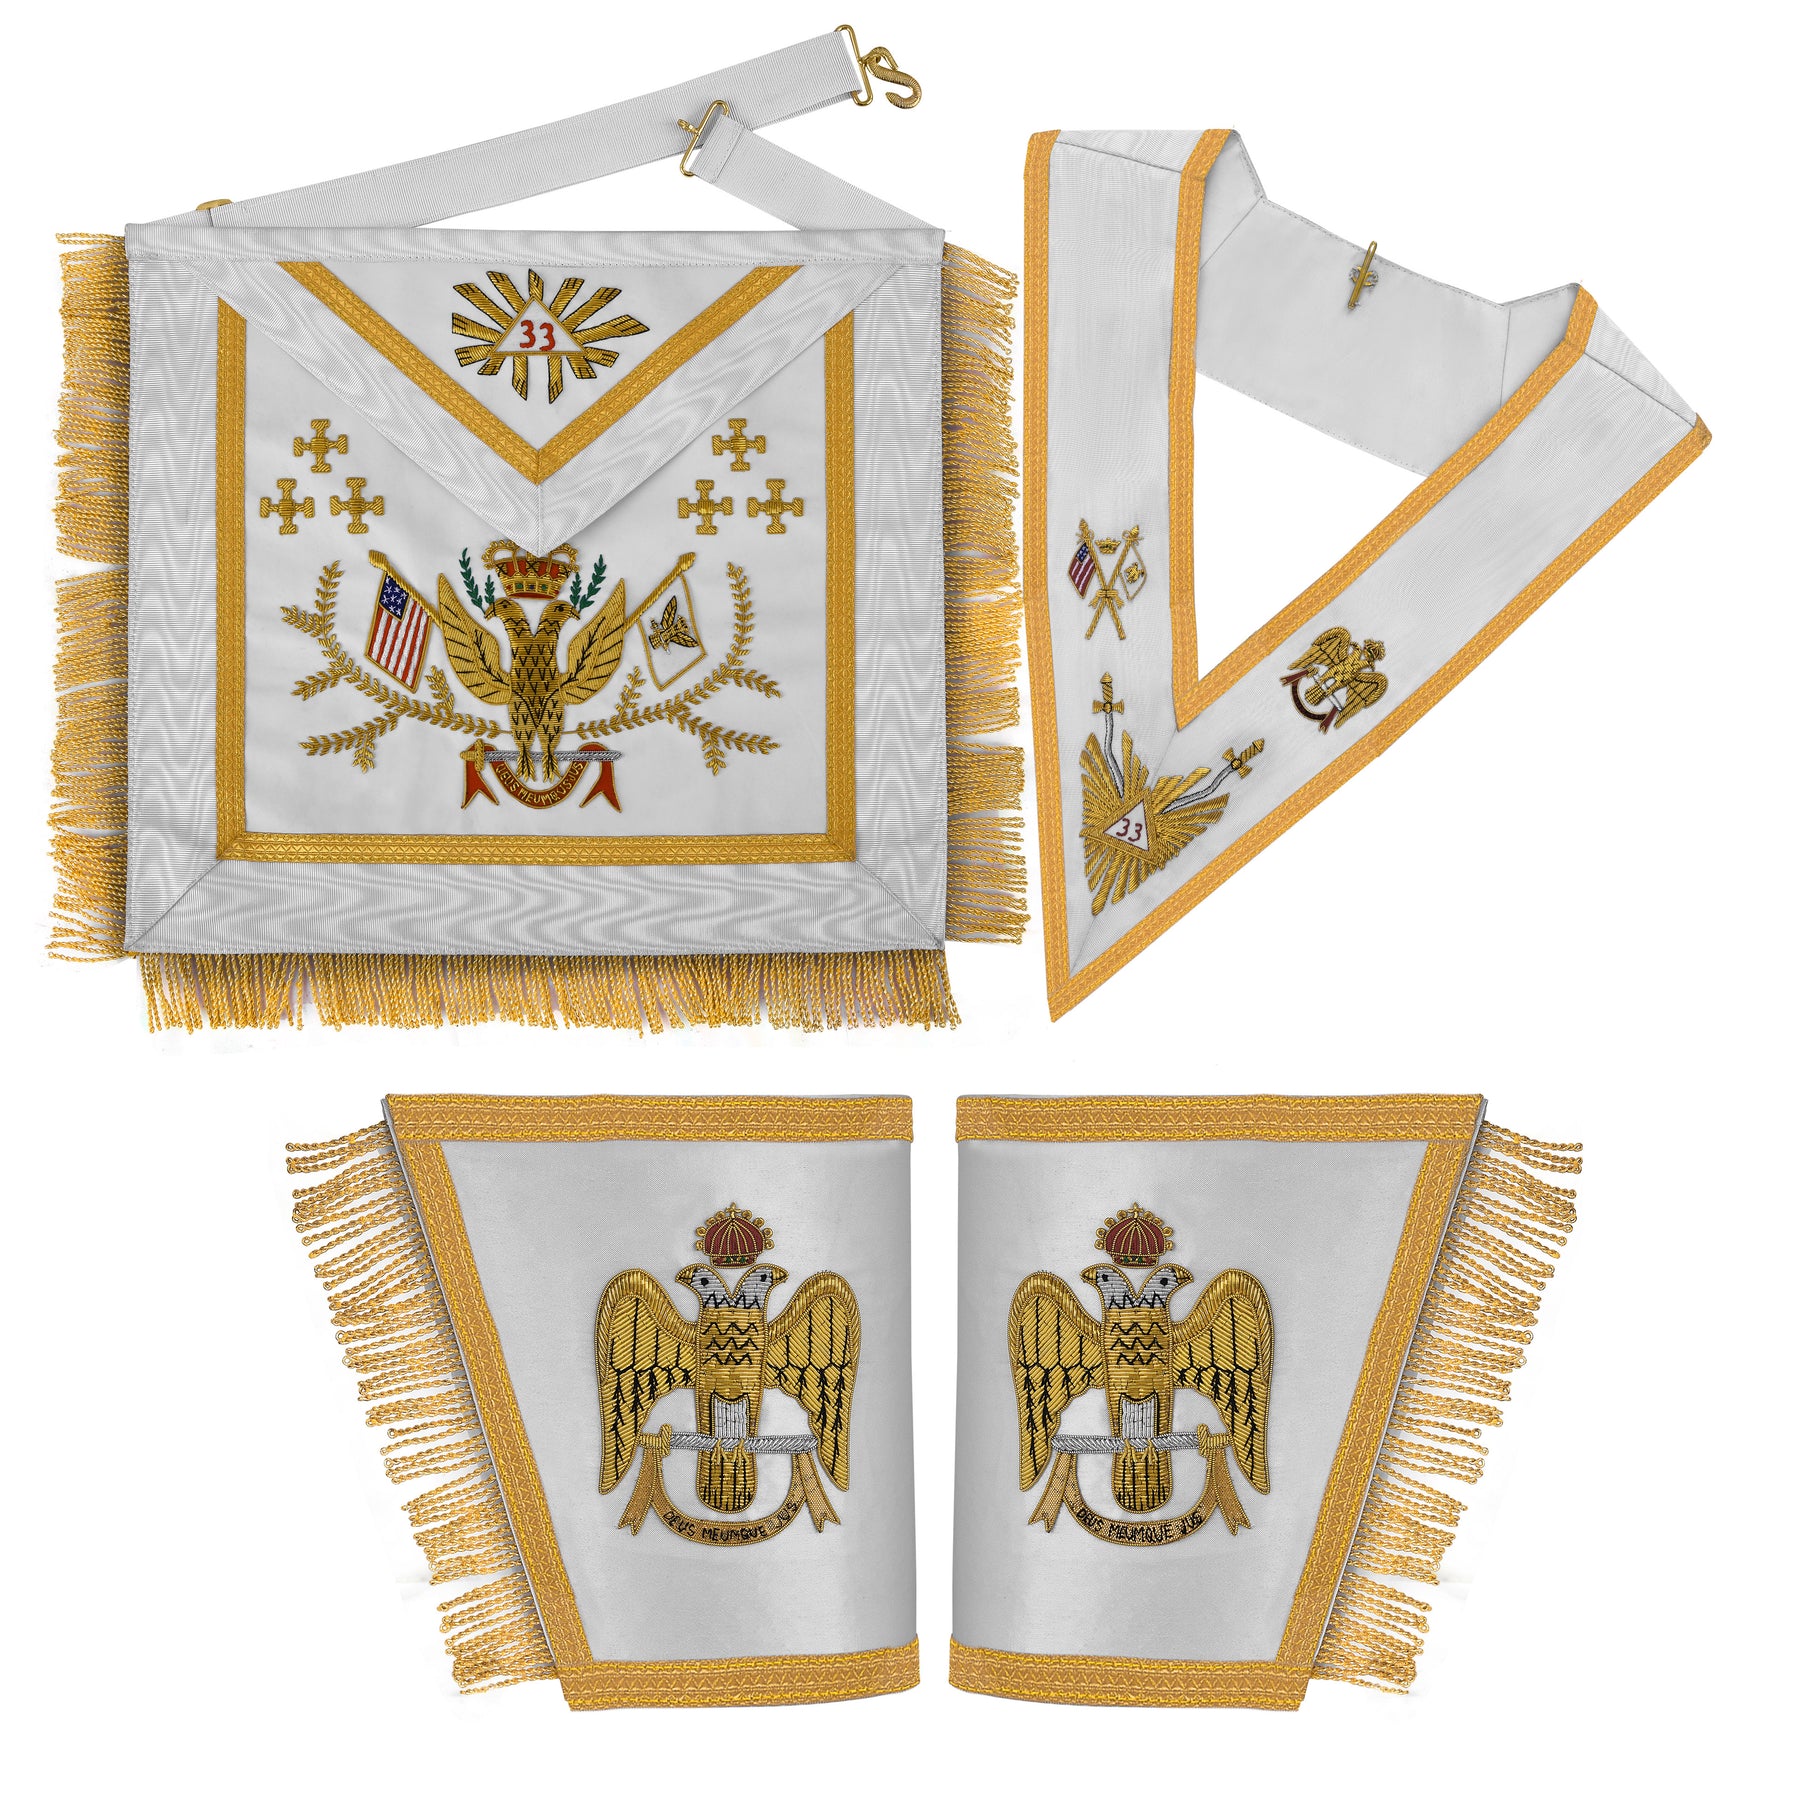 33rd Degree Scottish Rite Regalia Set - Hand Embroidery WINGS UP All Countries Flags - Bricks Masons